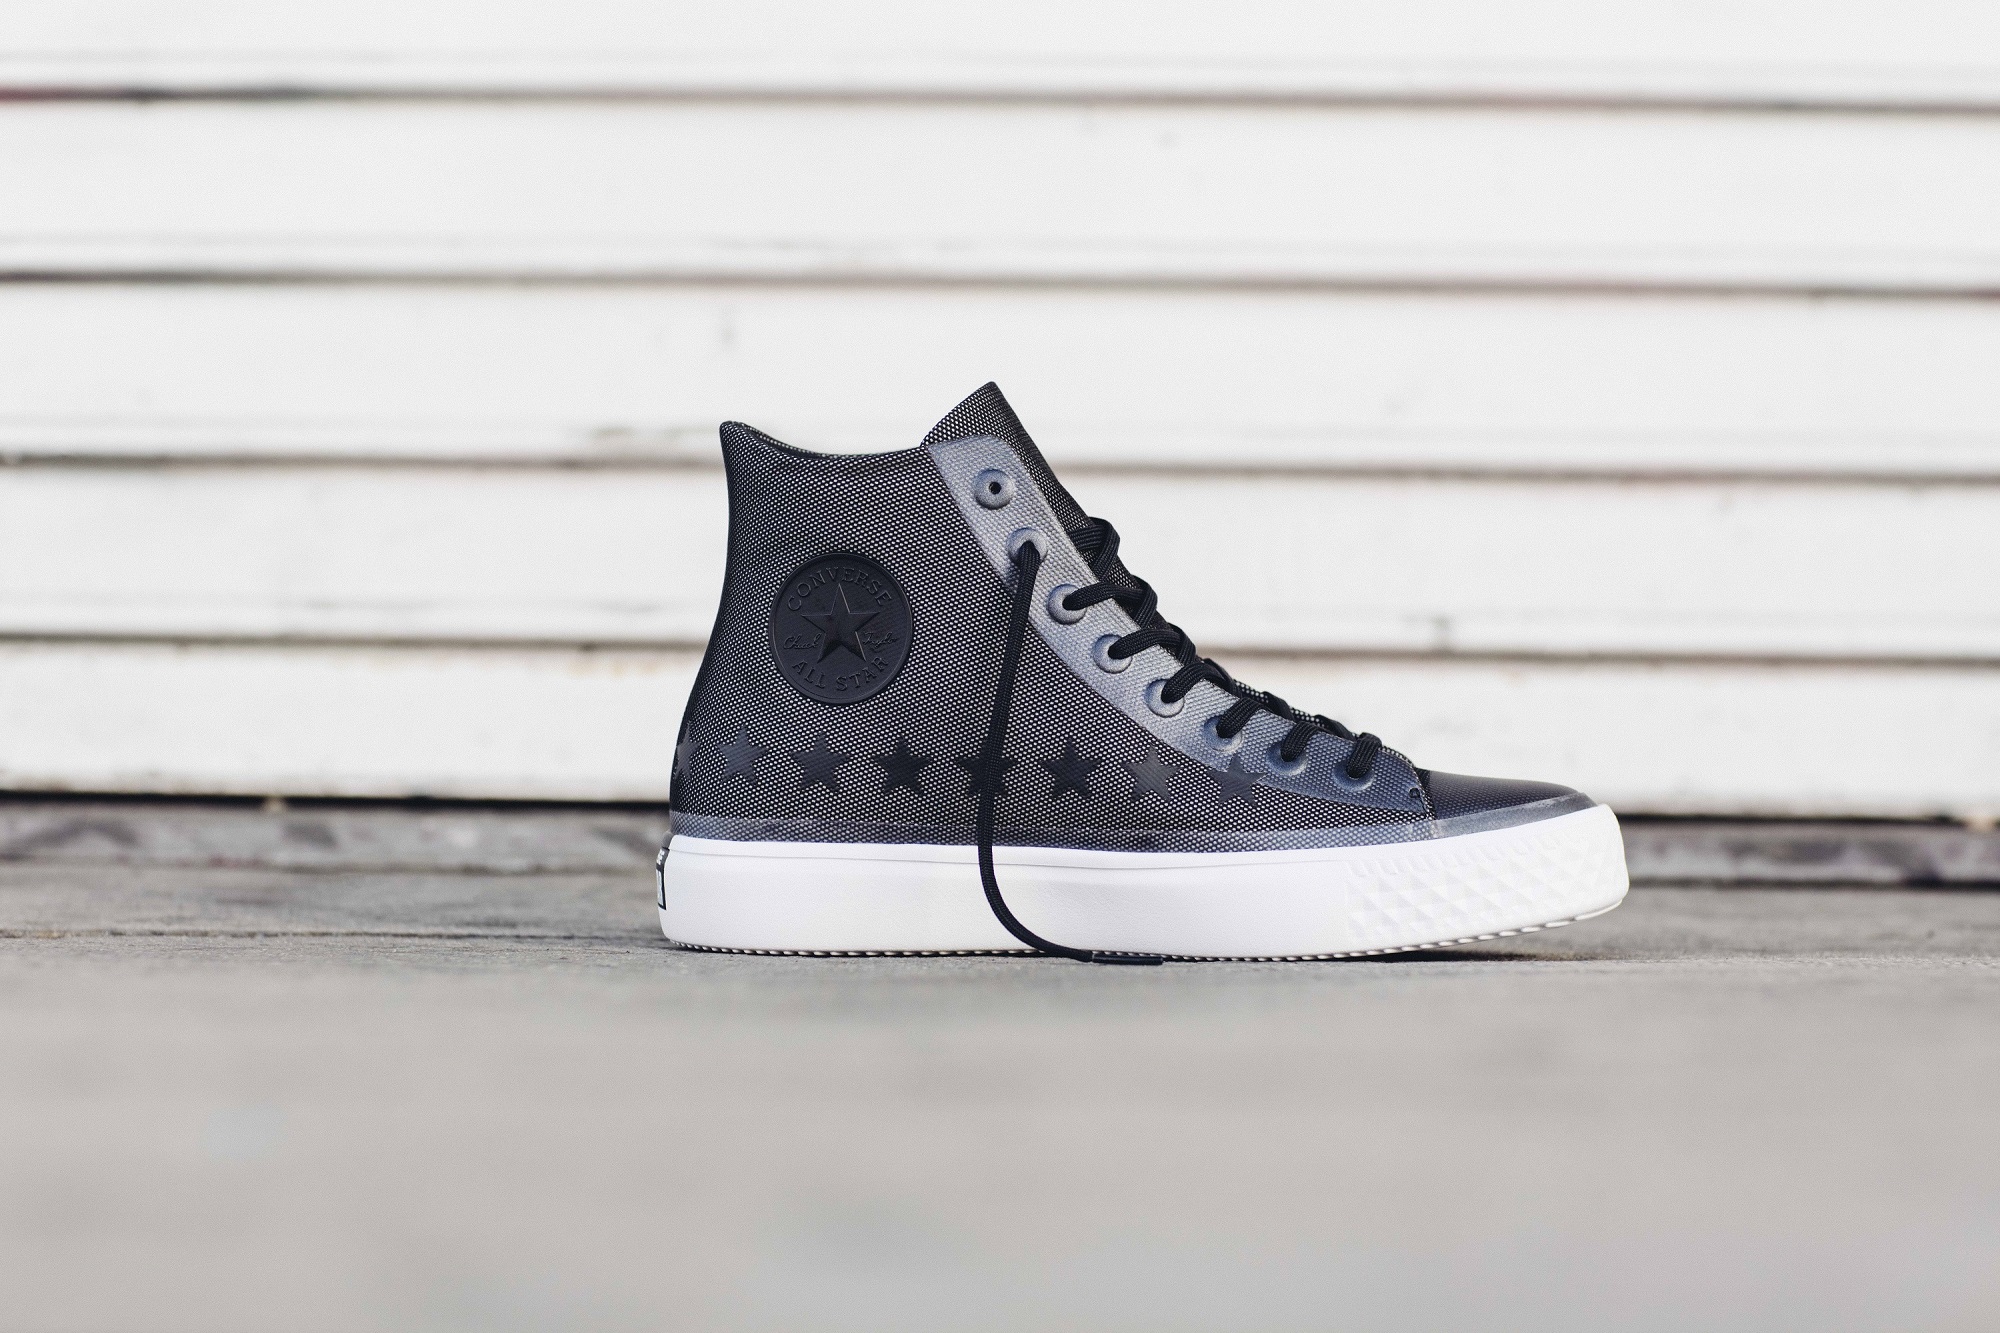 Converse Launches The All-New 